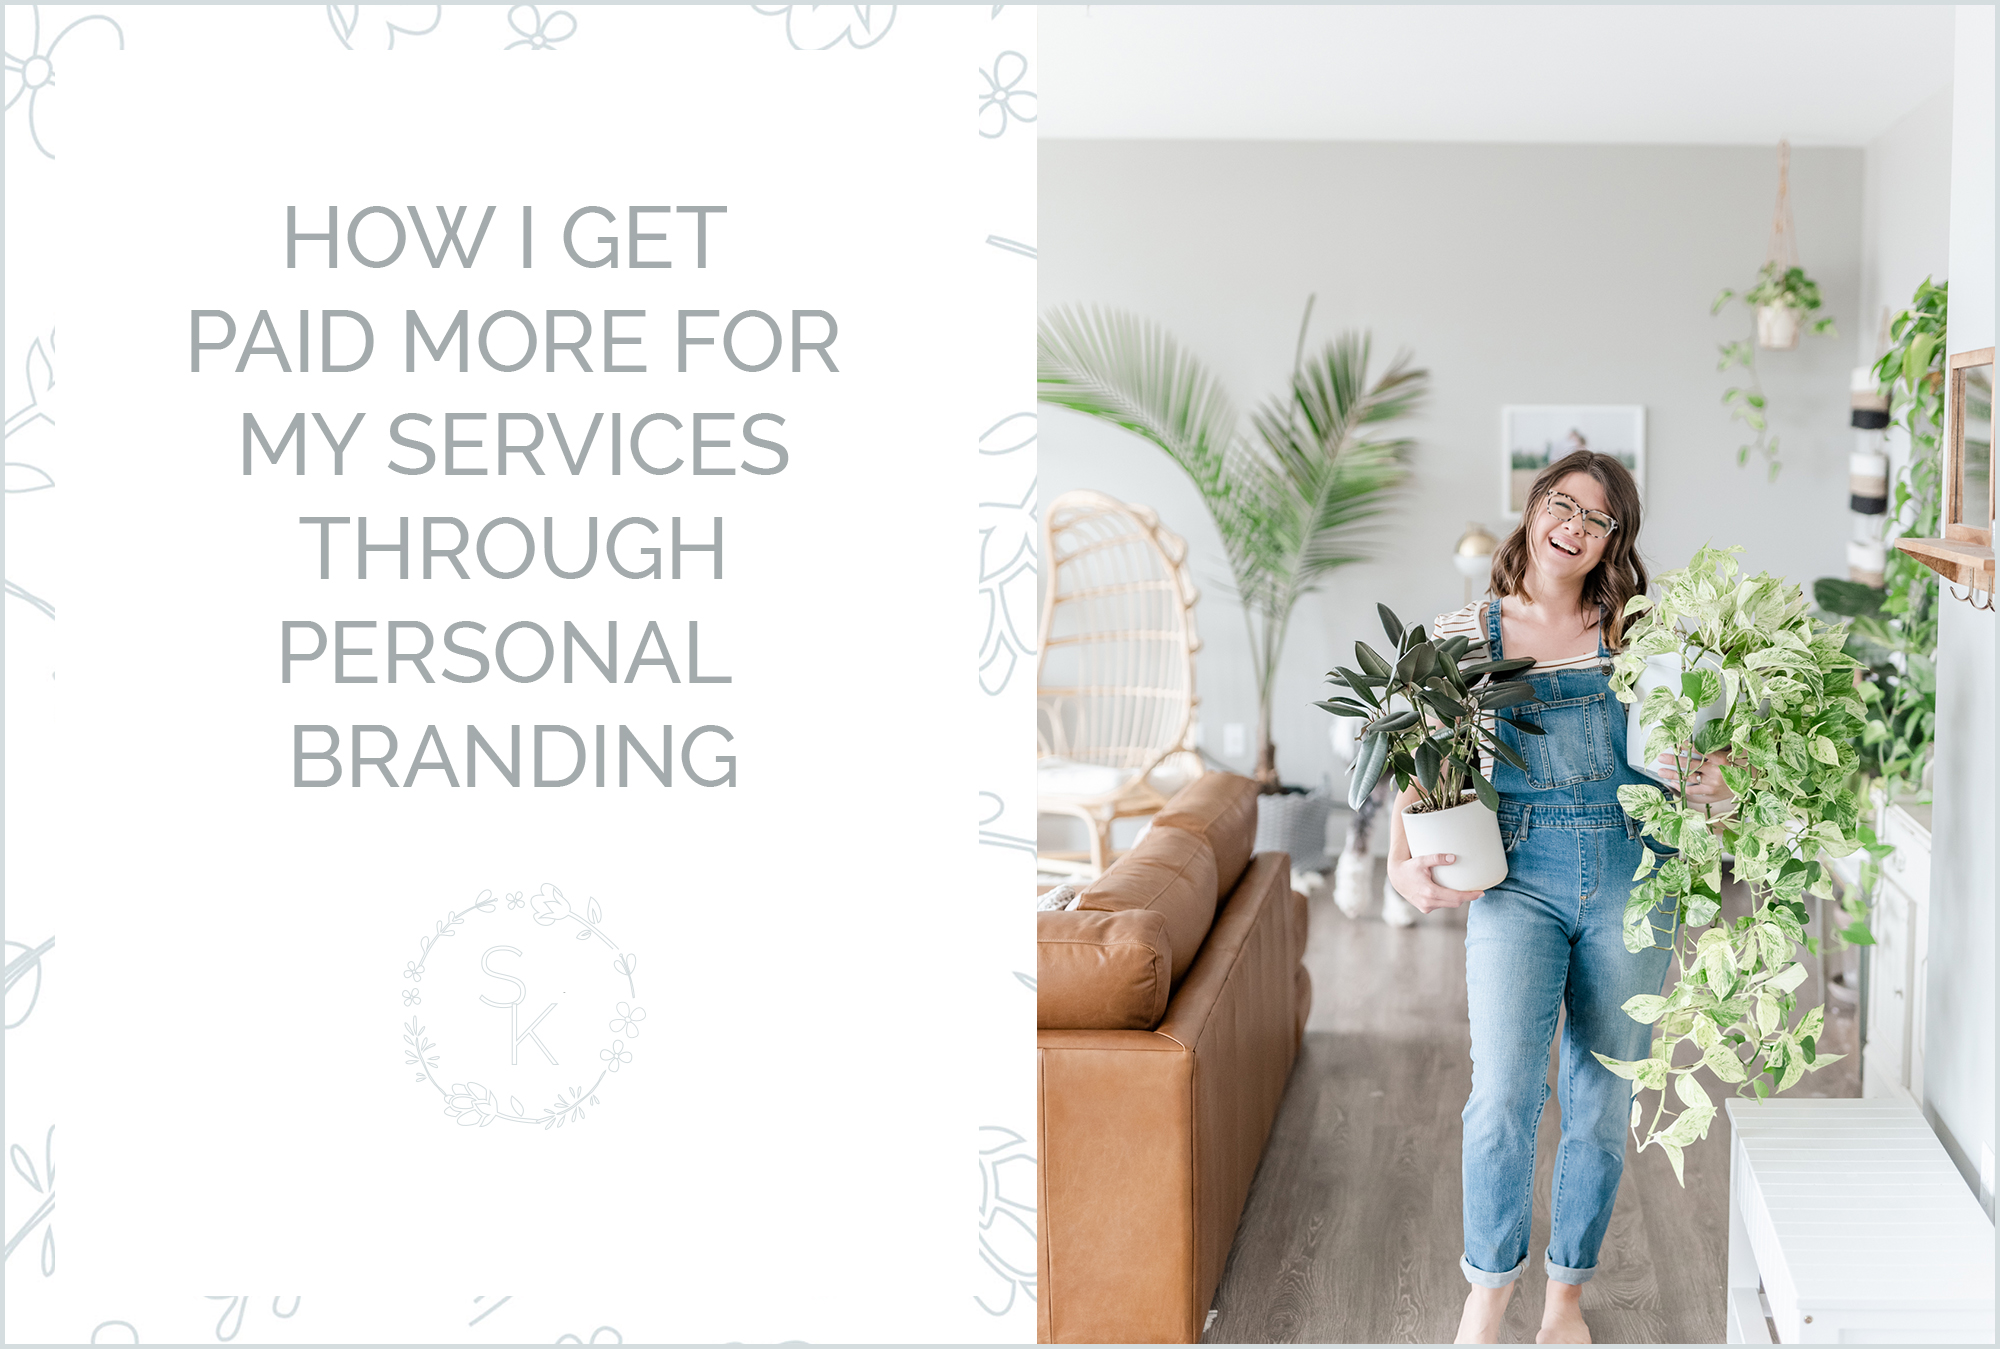 Wedding photographer and educator Stephanie Kase Photography shares how personal branding can increase your value and sales as a business owner